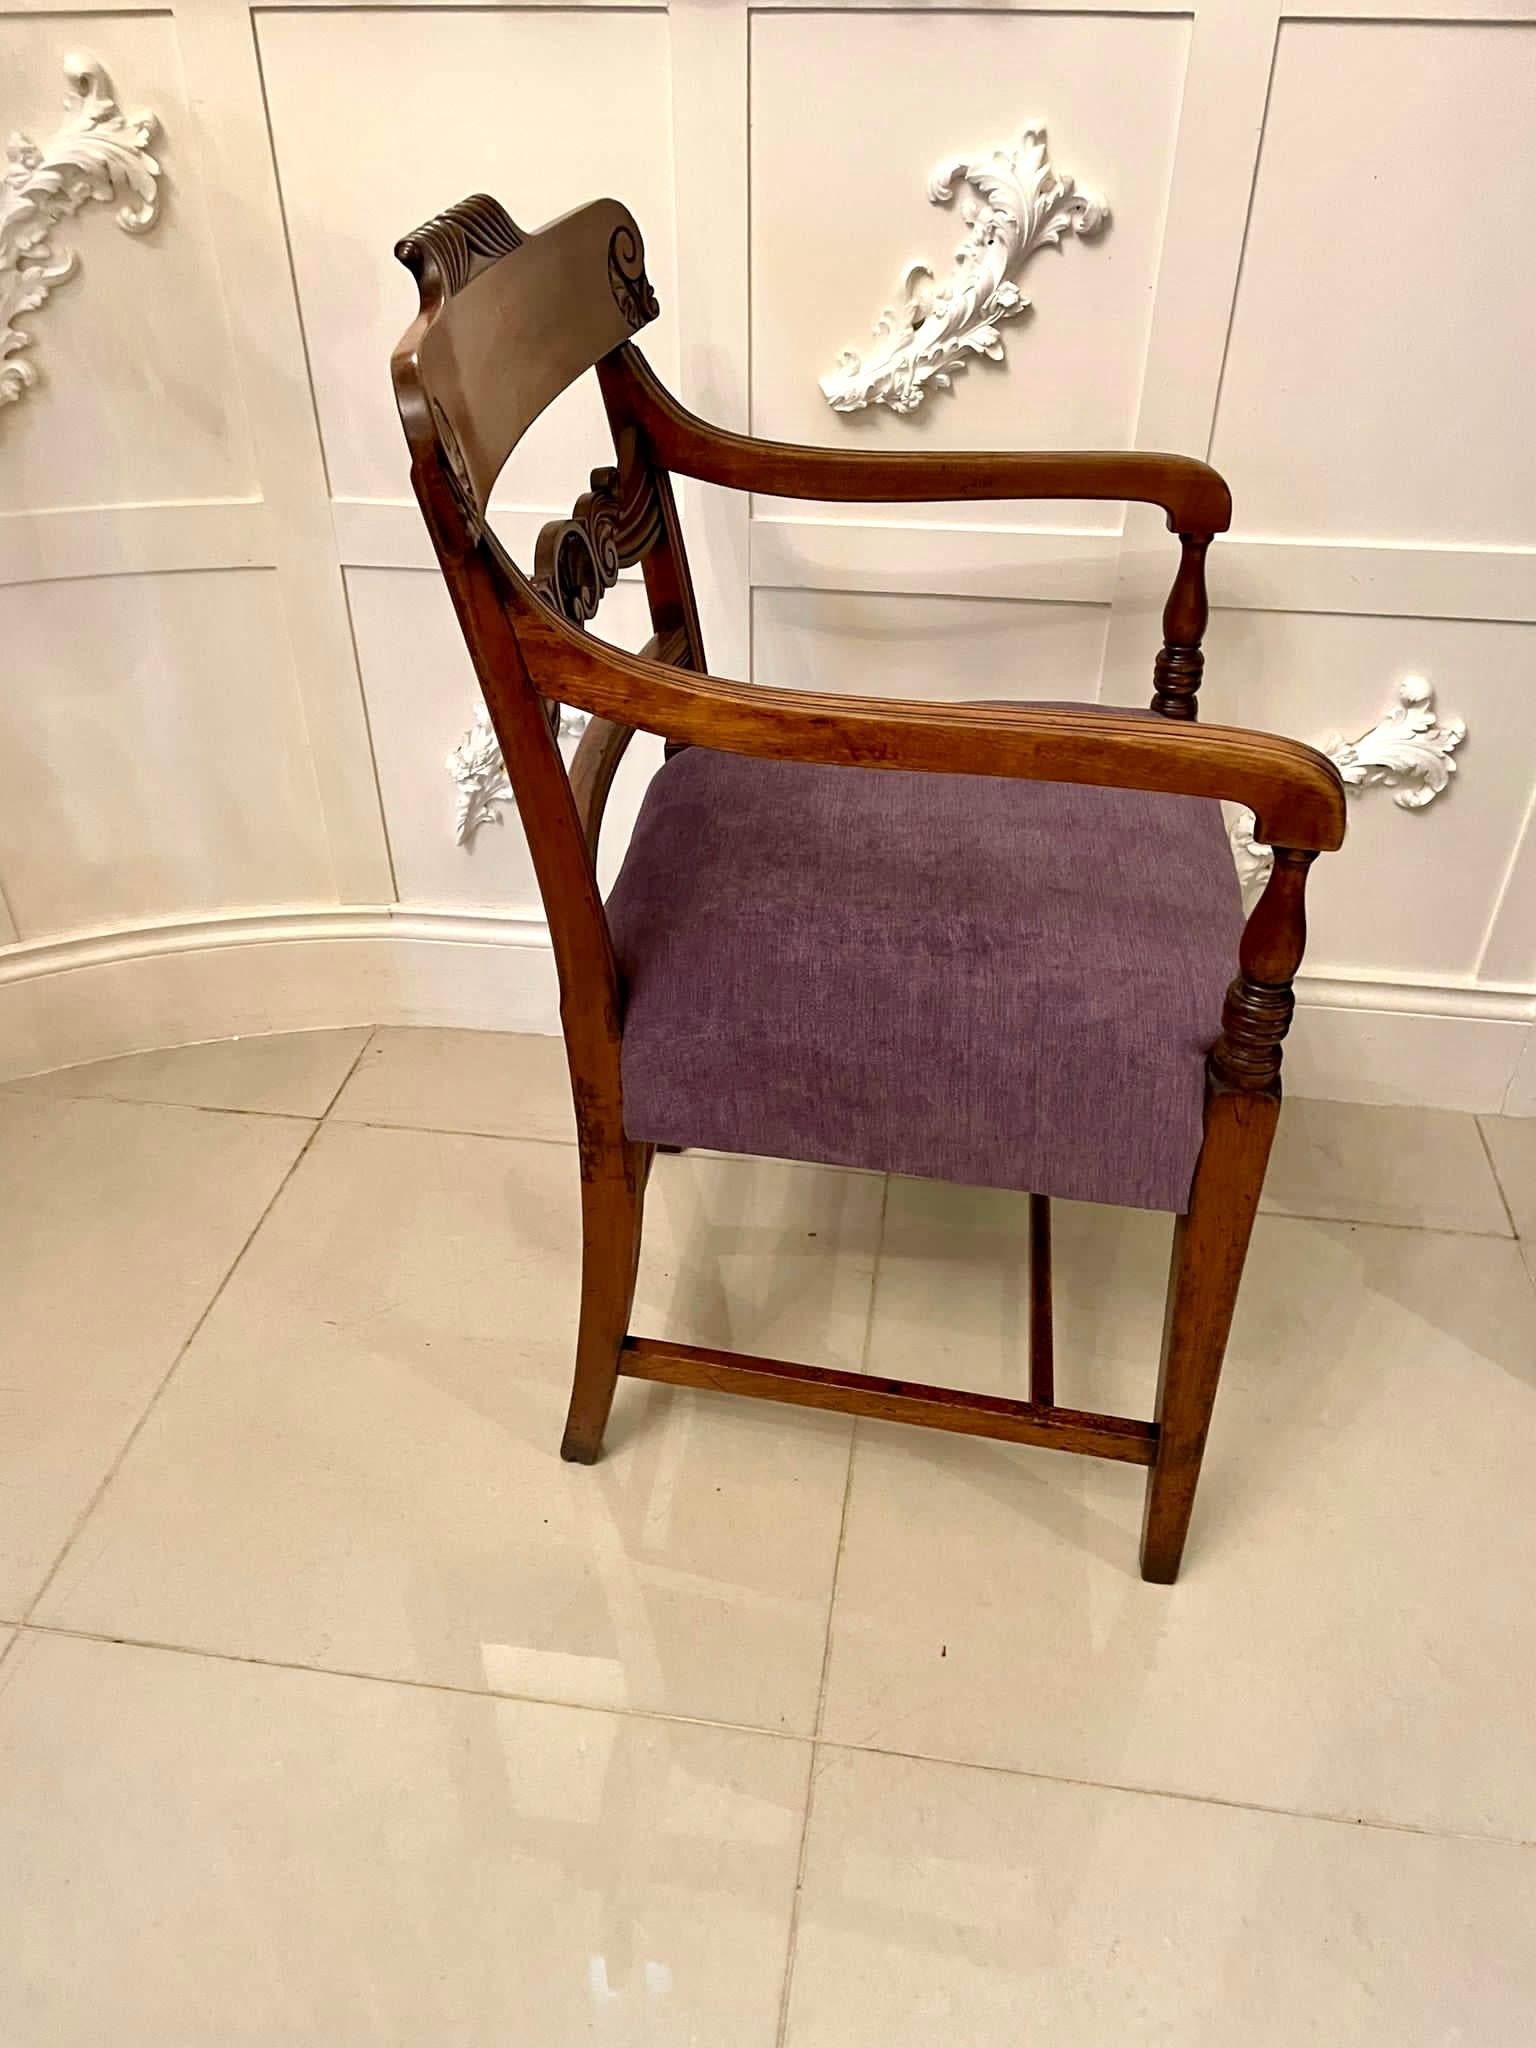 19th Century Antique Regency Quality Mahogany Desk Chair For Sale